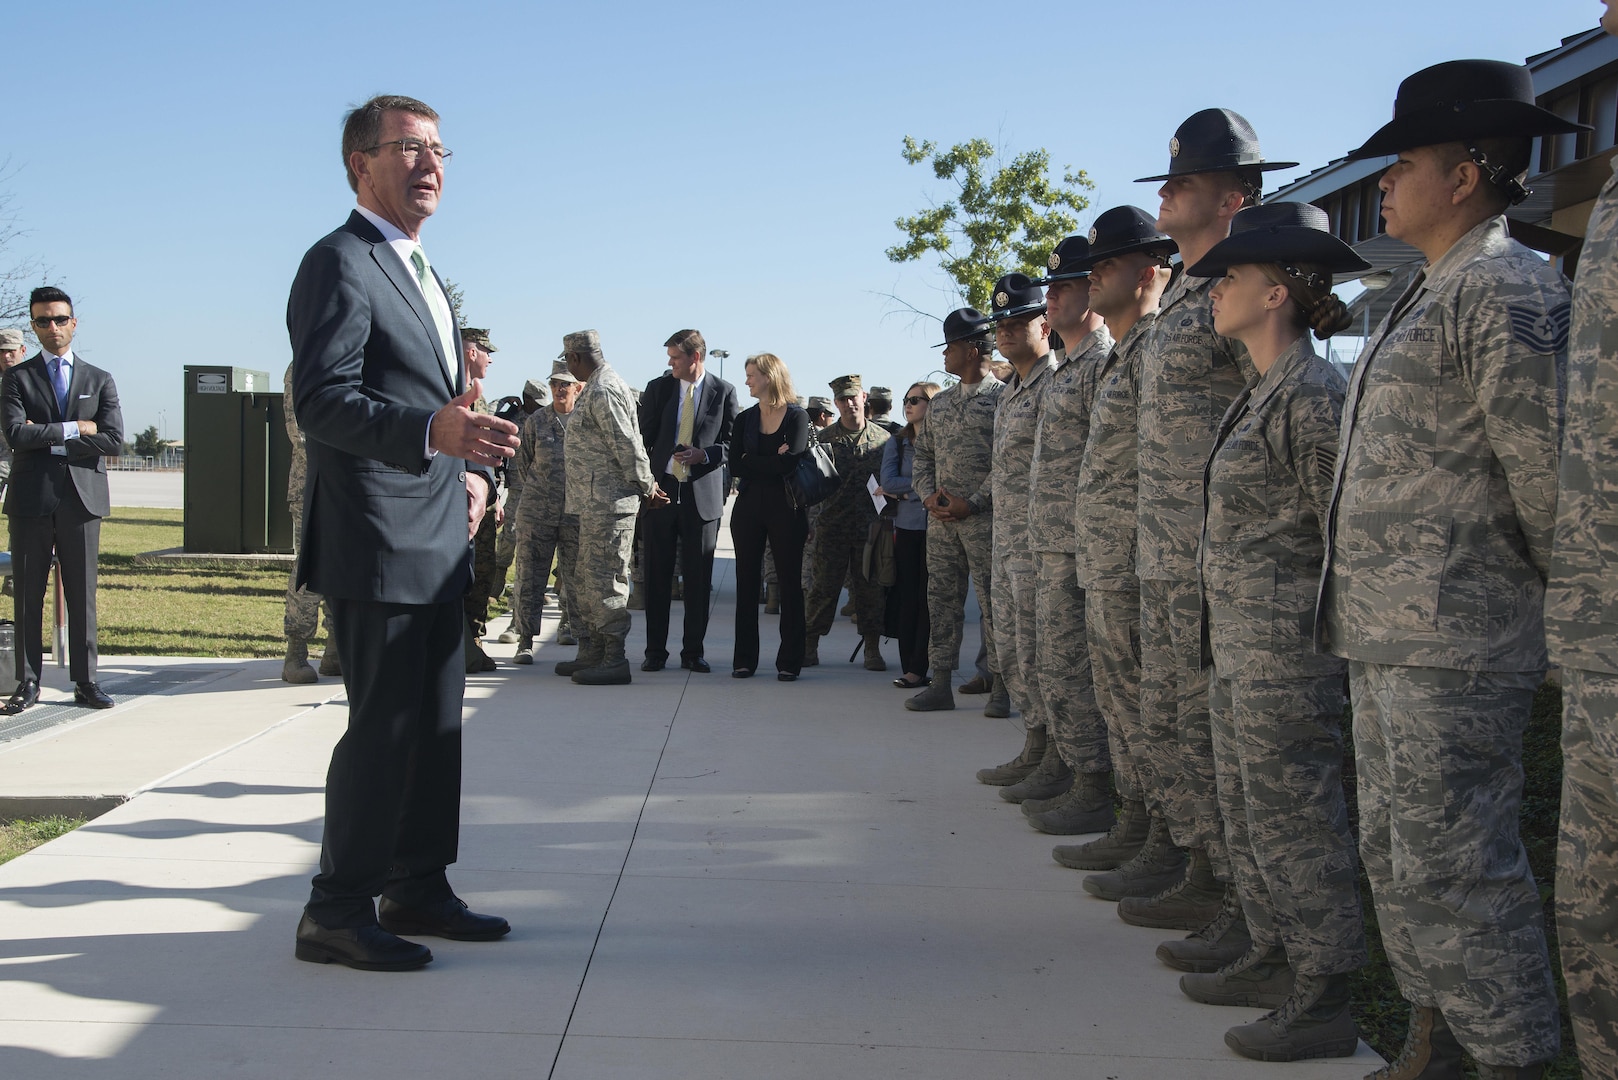 Defense Secretary Ash Carter speaks to U.S. Air Force basic military training instructors during his visit to Joint Base San Antonio-Lackland, Nov. 16, 2016.  Carter is on a four-day trip focusing on the readiness of the nation’s force and the effectiveness of the warfighter’s training and equipment.  (U.S. Air Force photo by Sean M. Worrell/Not Released)